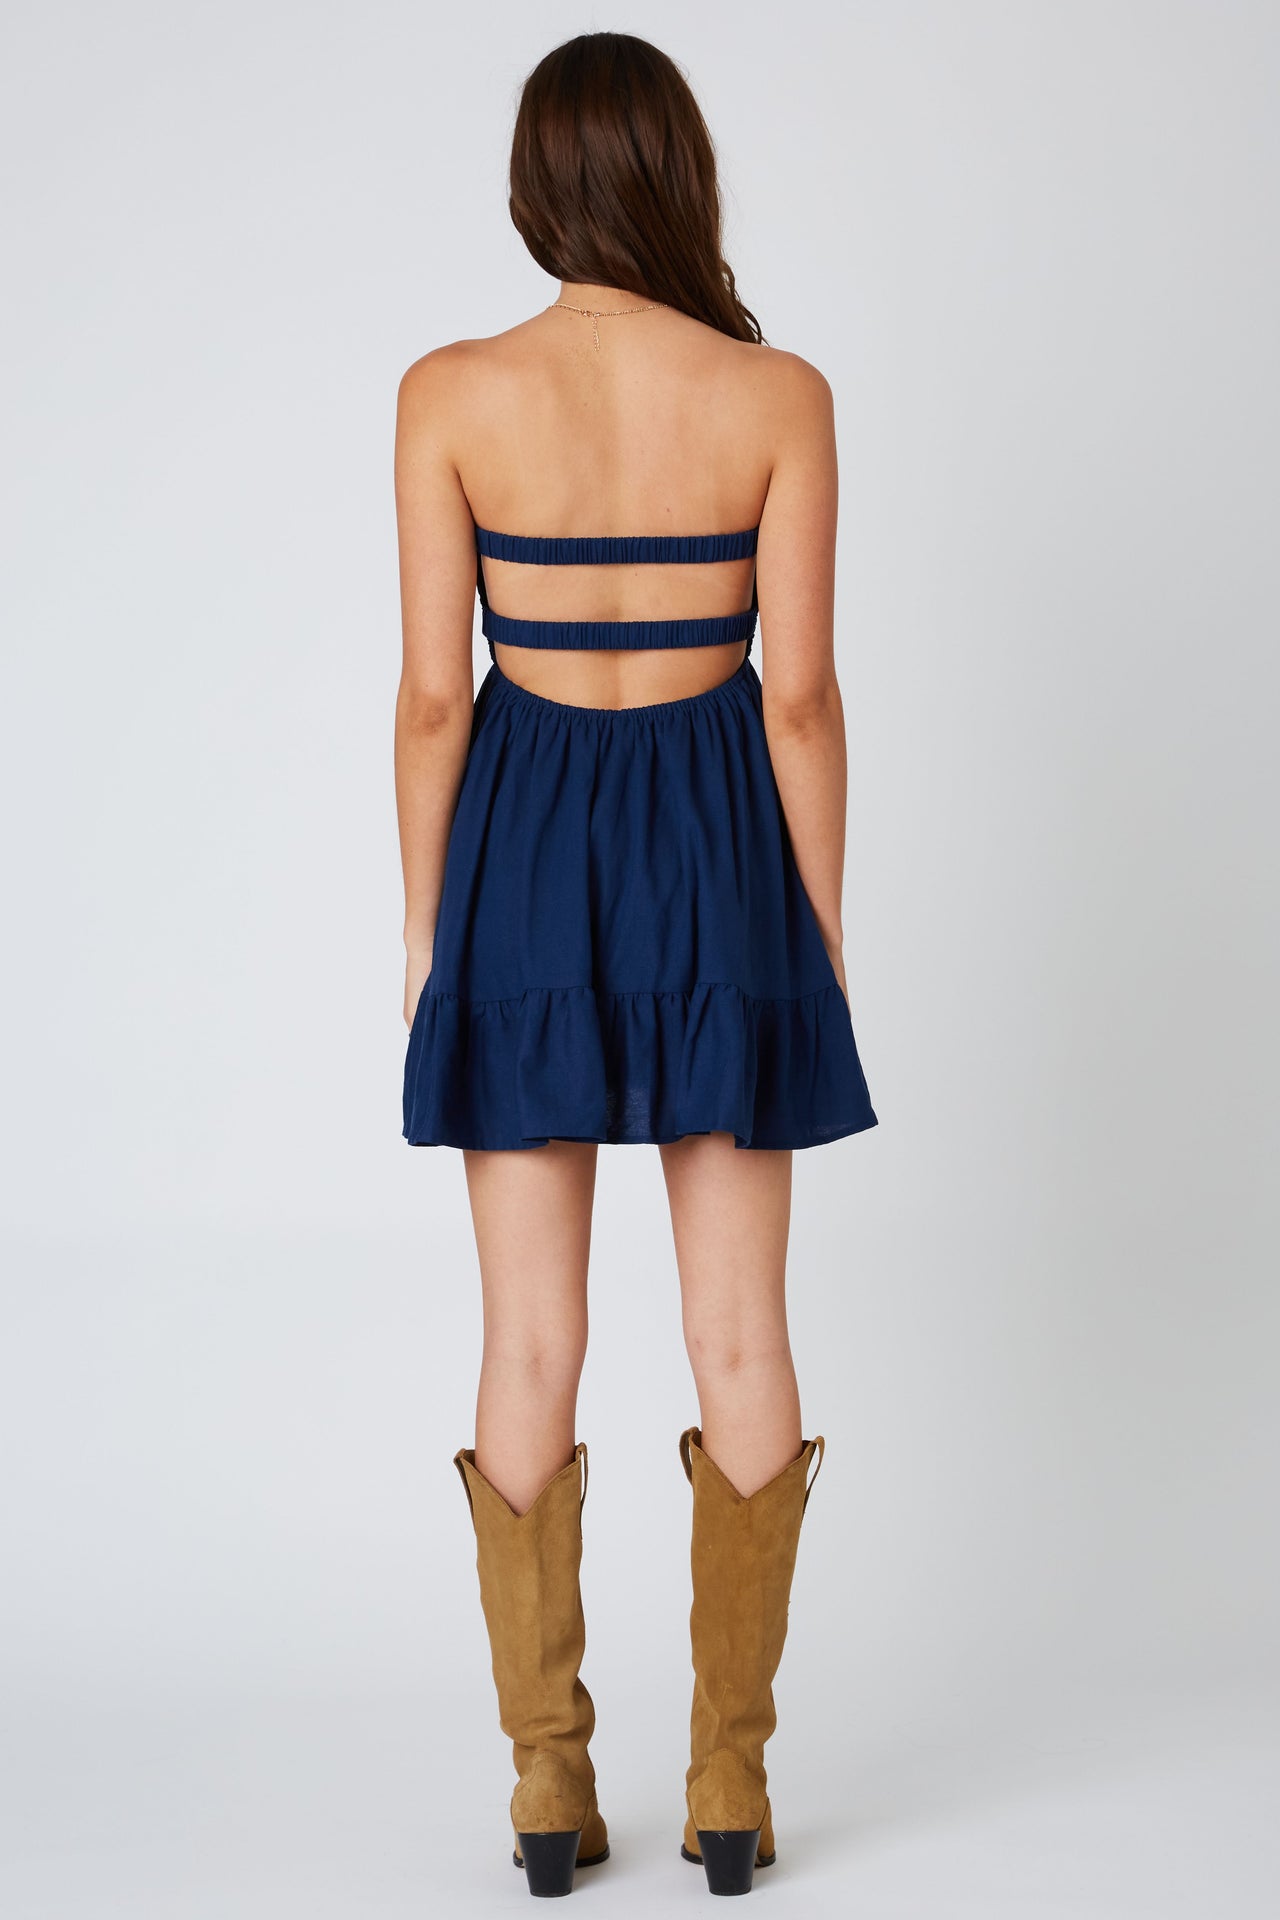 Whitney Romper Navy, Romper Dress by Cotton Candy | LIT Boutique